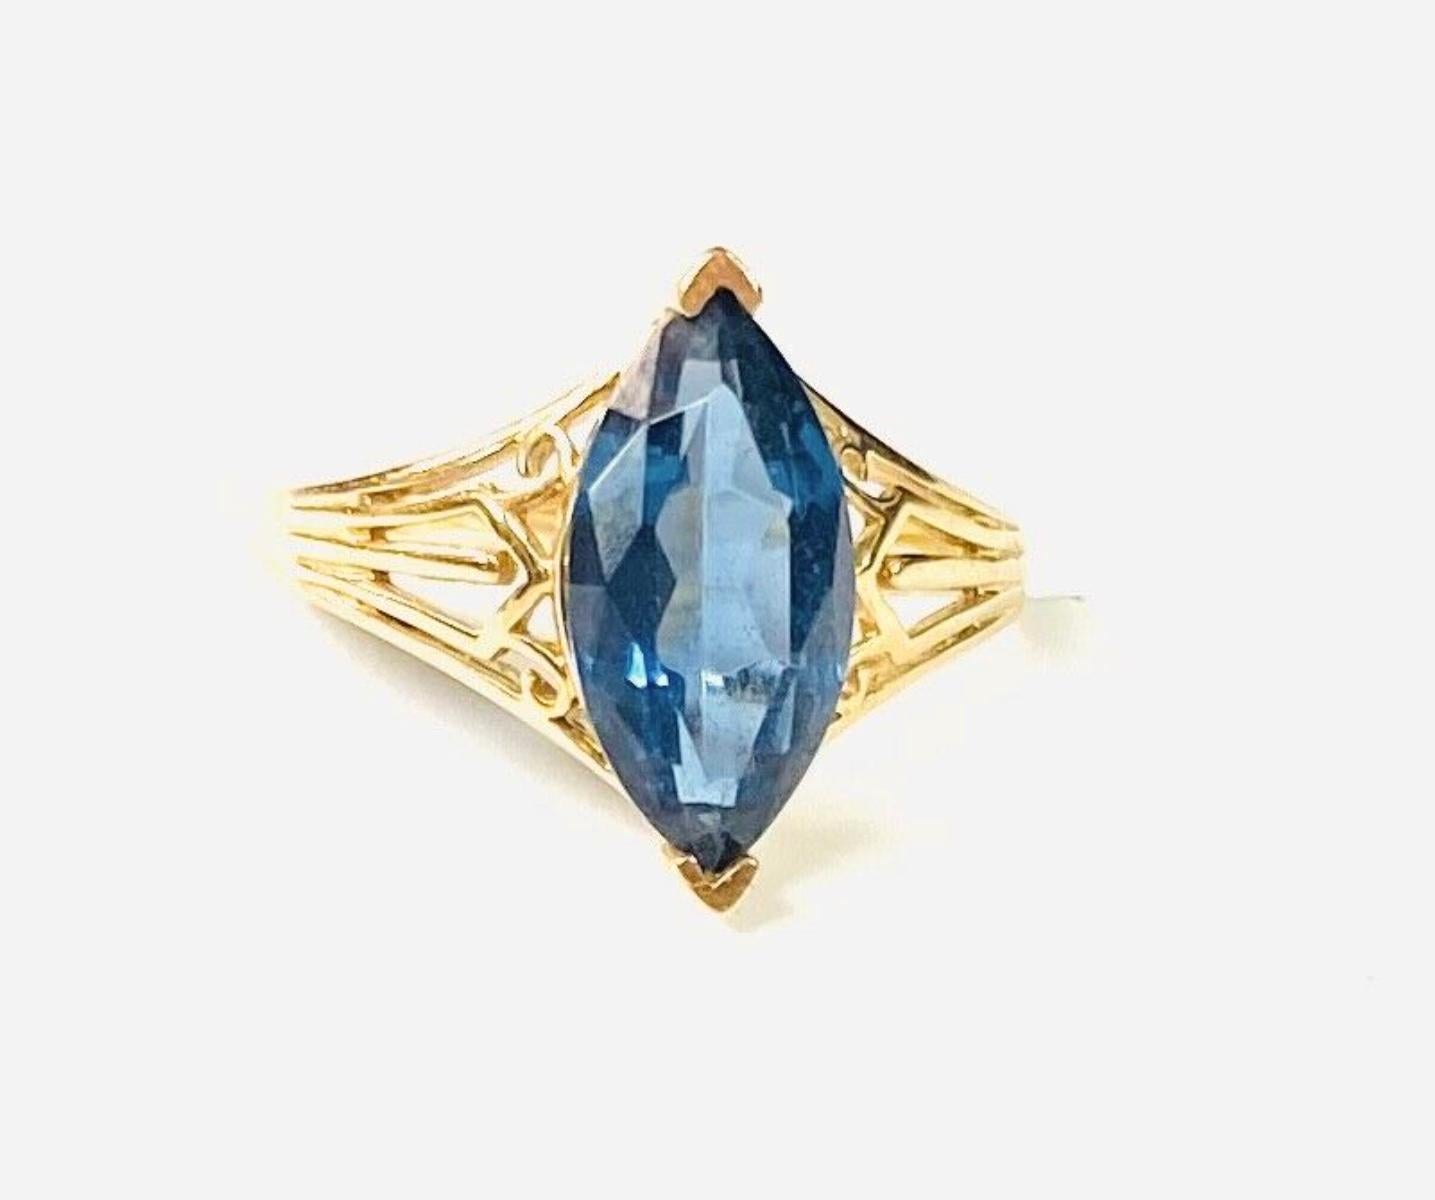 14k yellow gold marquise blue topaz ring, 3.10 Grams TW. The dimensions are approximately 14 mm x 7 mm. Approximately 3 carats. Marked 14k. Approximate size 7.5.
